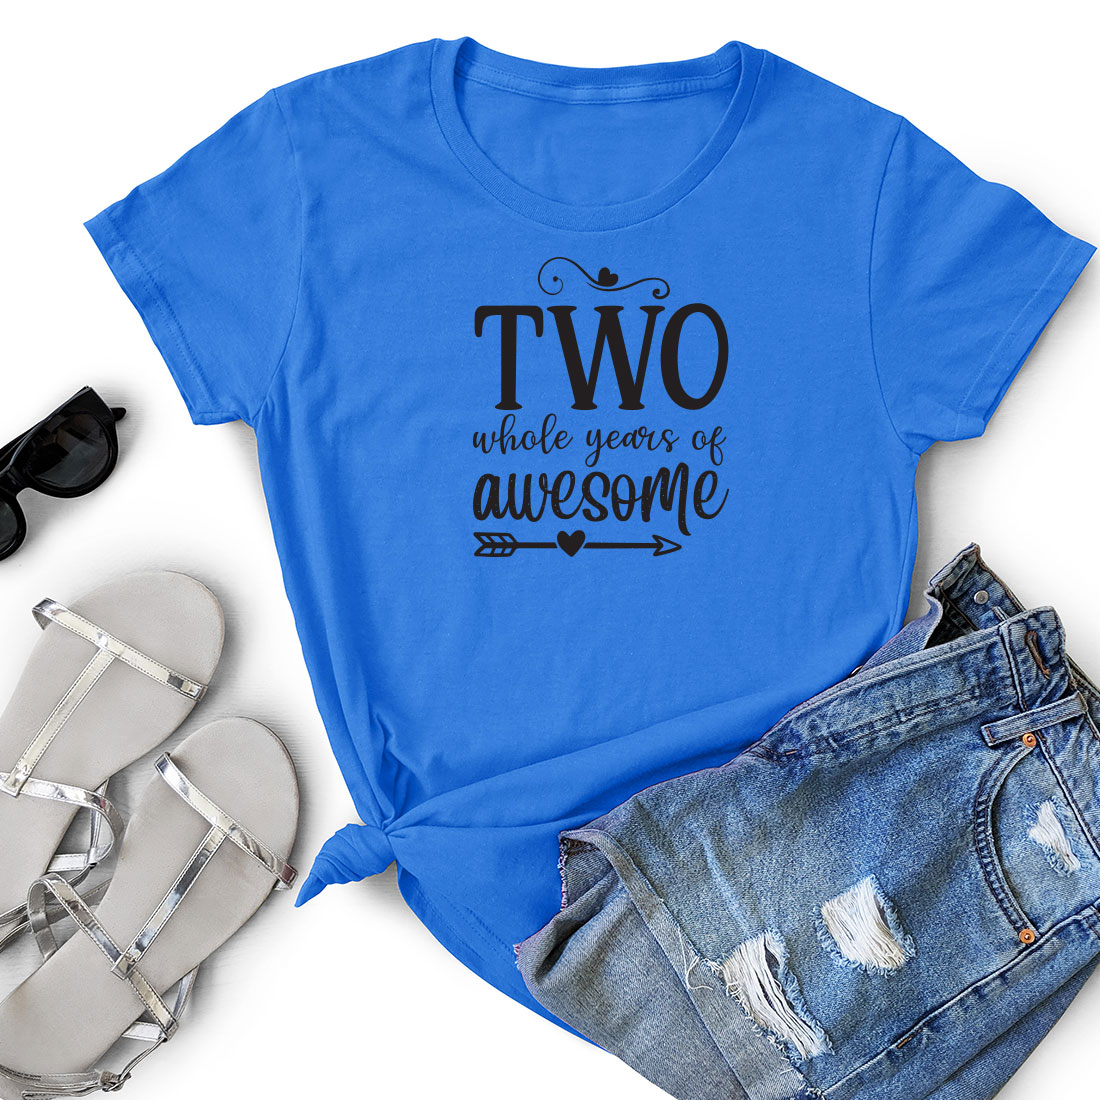 T - shirt that says two whole years of awesome.